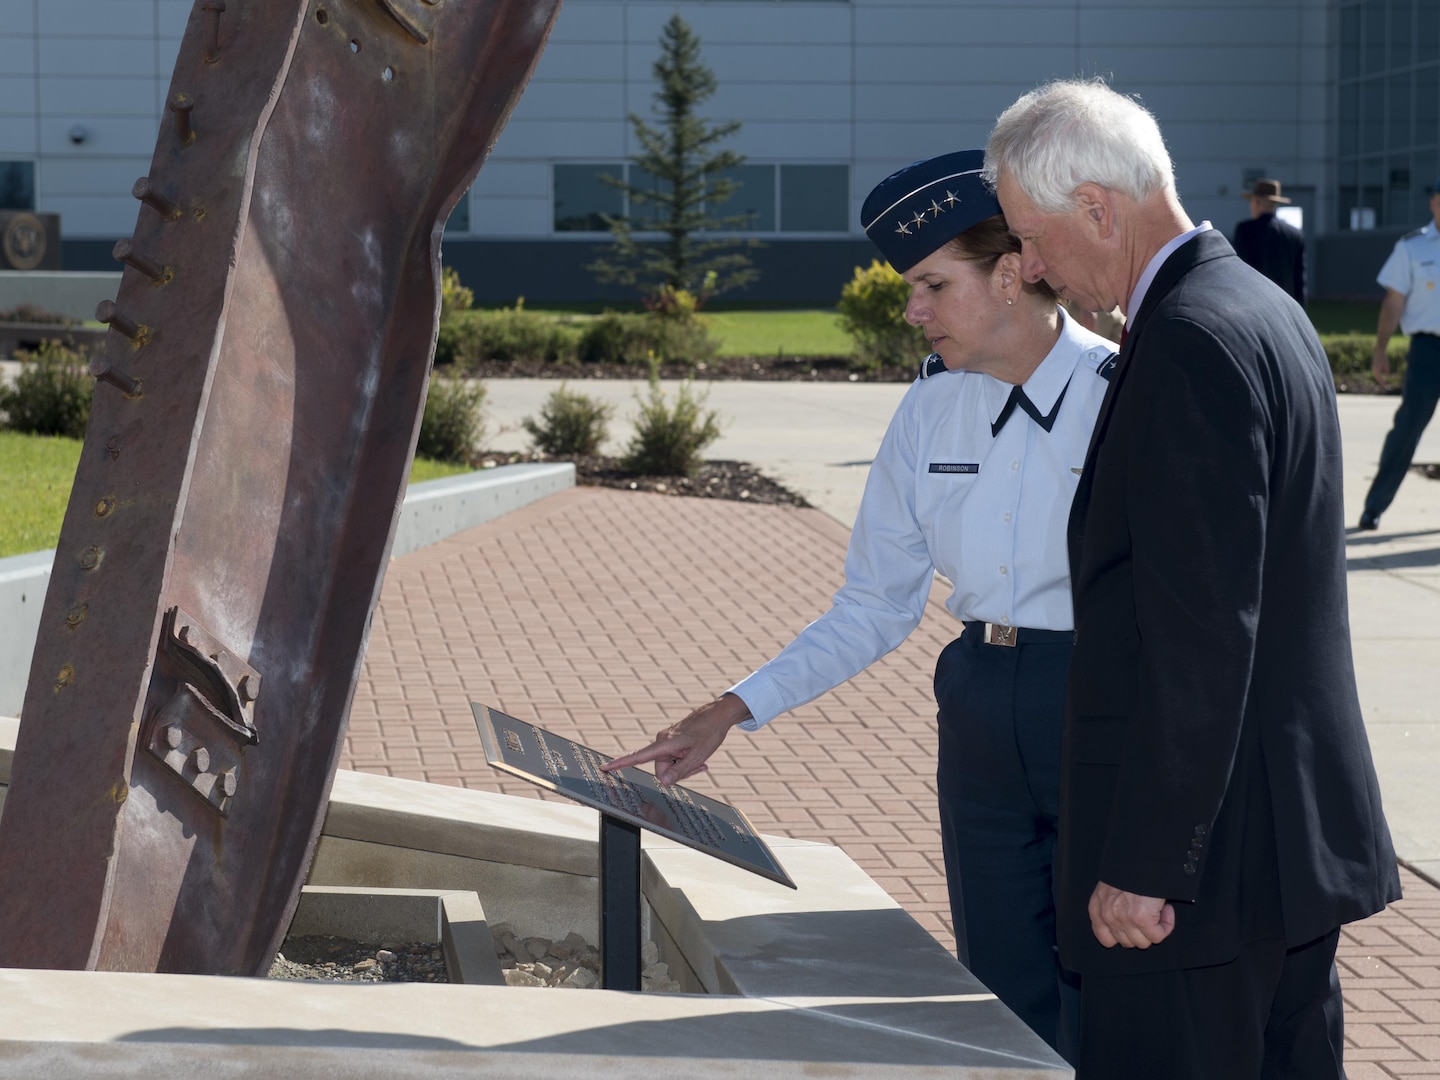 NORAD and USNORTHCOM Commander, Gen. Lori Robinson and the Honourable Stéphane Dion, Canadian Minister of Foreign Affairs, pause in front of the 9/11 Memorial at the headquarters prior to the Minister receiving briefings on the commands’ missions during his visit to Peterson Air Force Base, in Colorado Springs, Colorado, August 8, 2016.